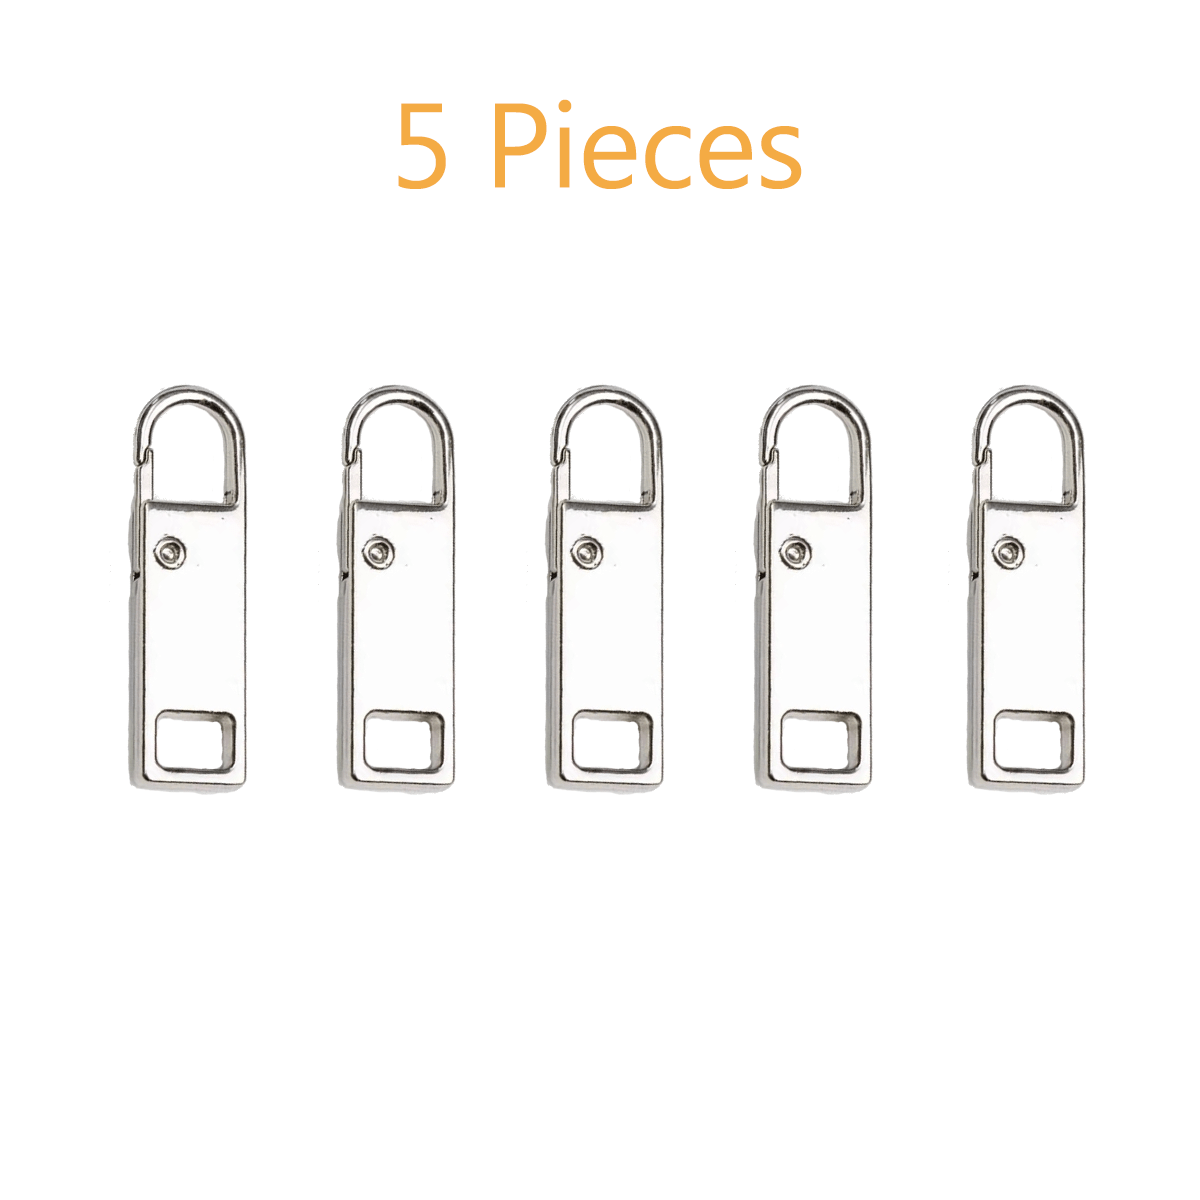 4 Pcs Zipper Pulls Tab Replacement Luggage Zipper Pull Extension Backpack Zippers Tags Handle Mend Fixer Repair for Suitcase, Gold